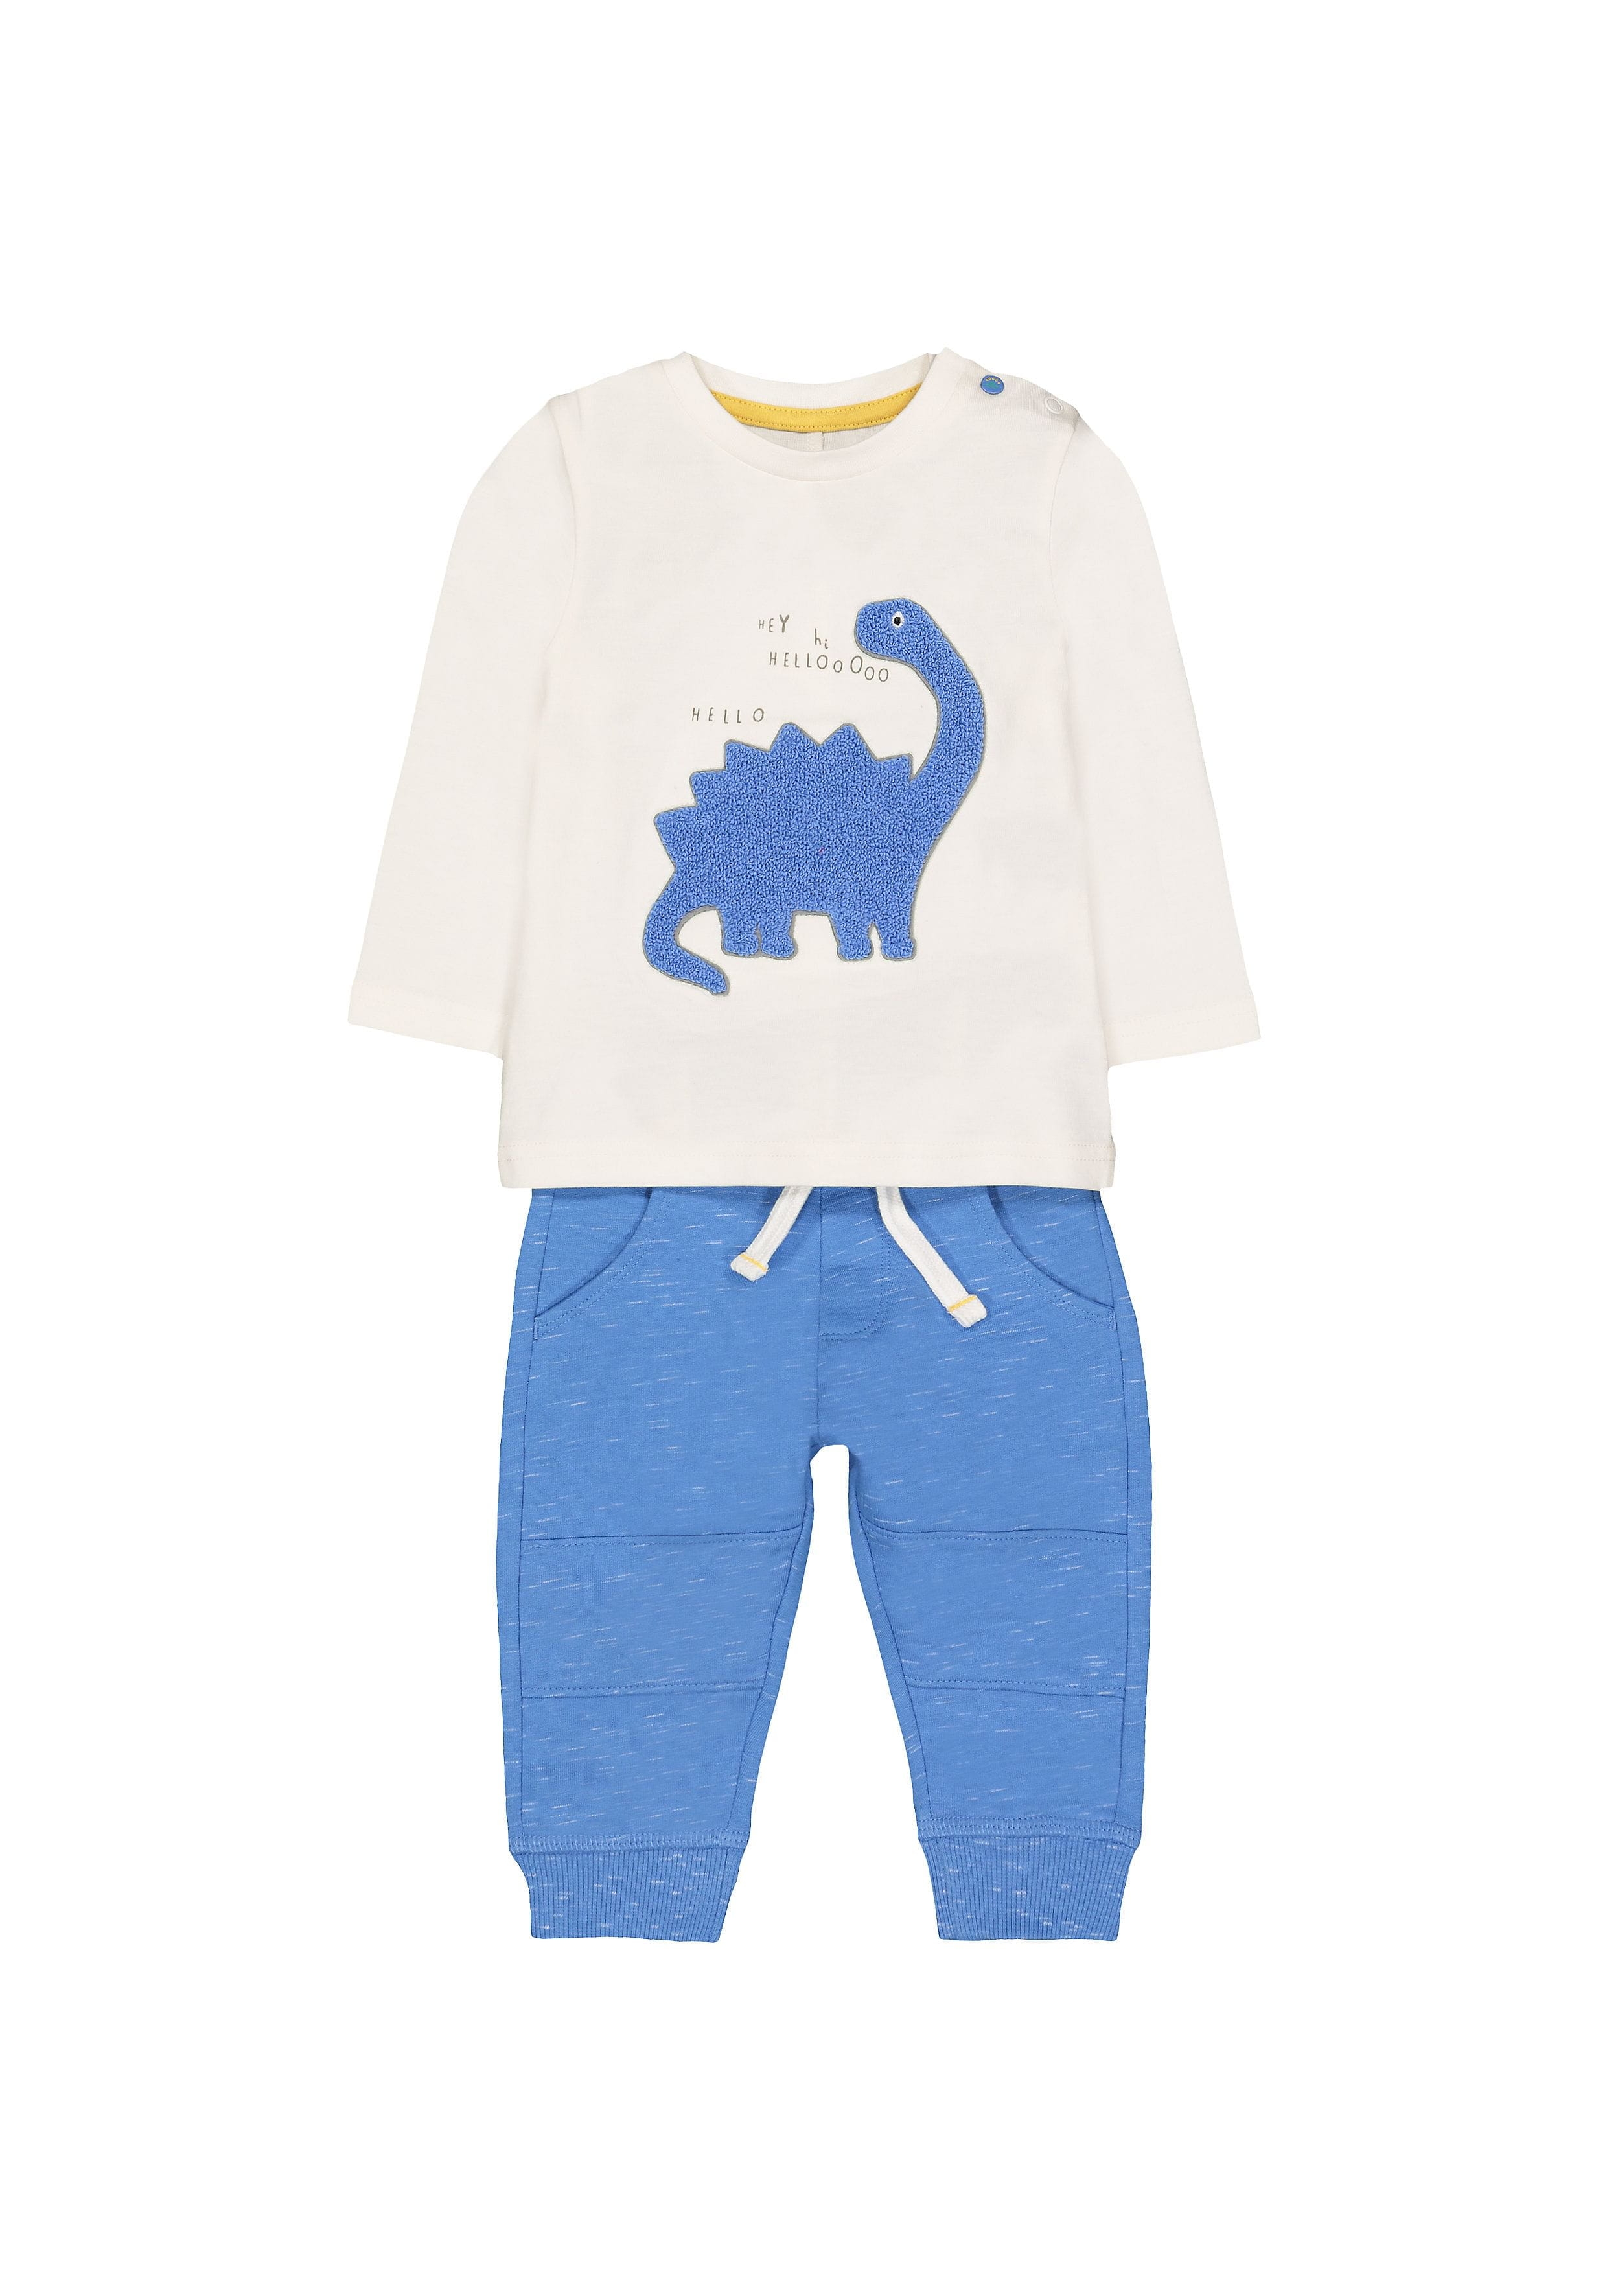 Mothercare | White & Blue Printed Twin Set 0